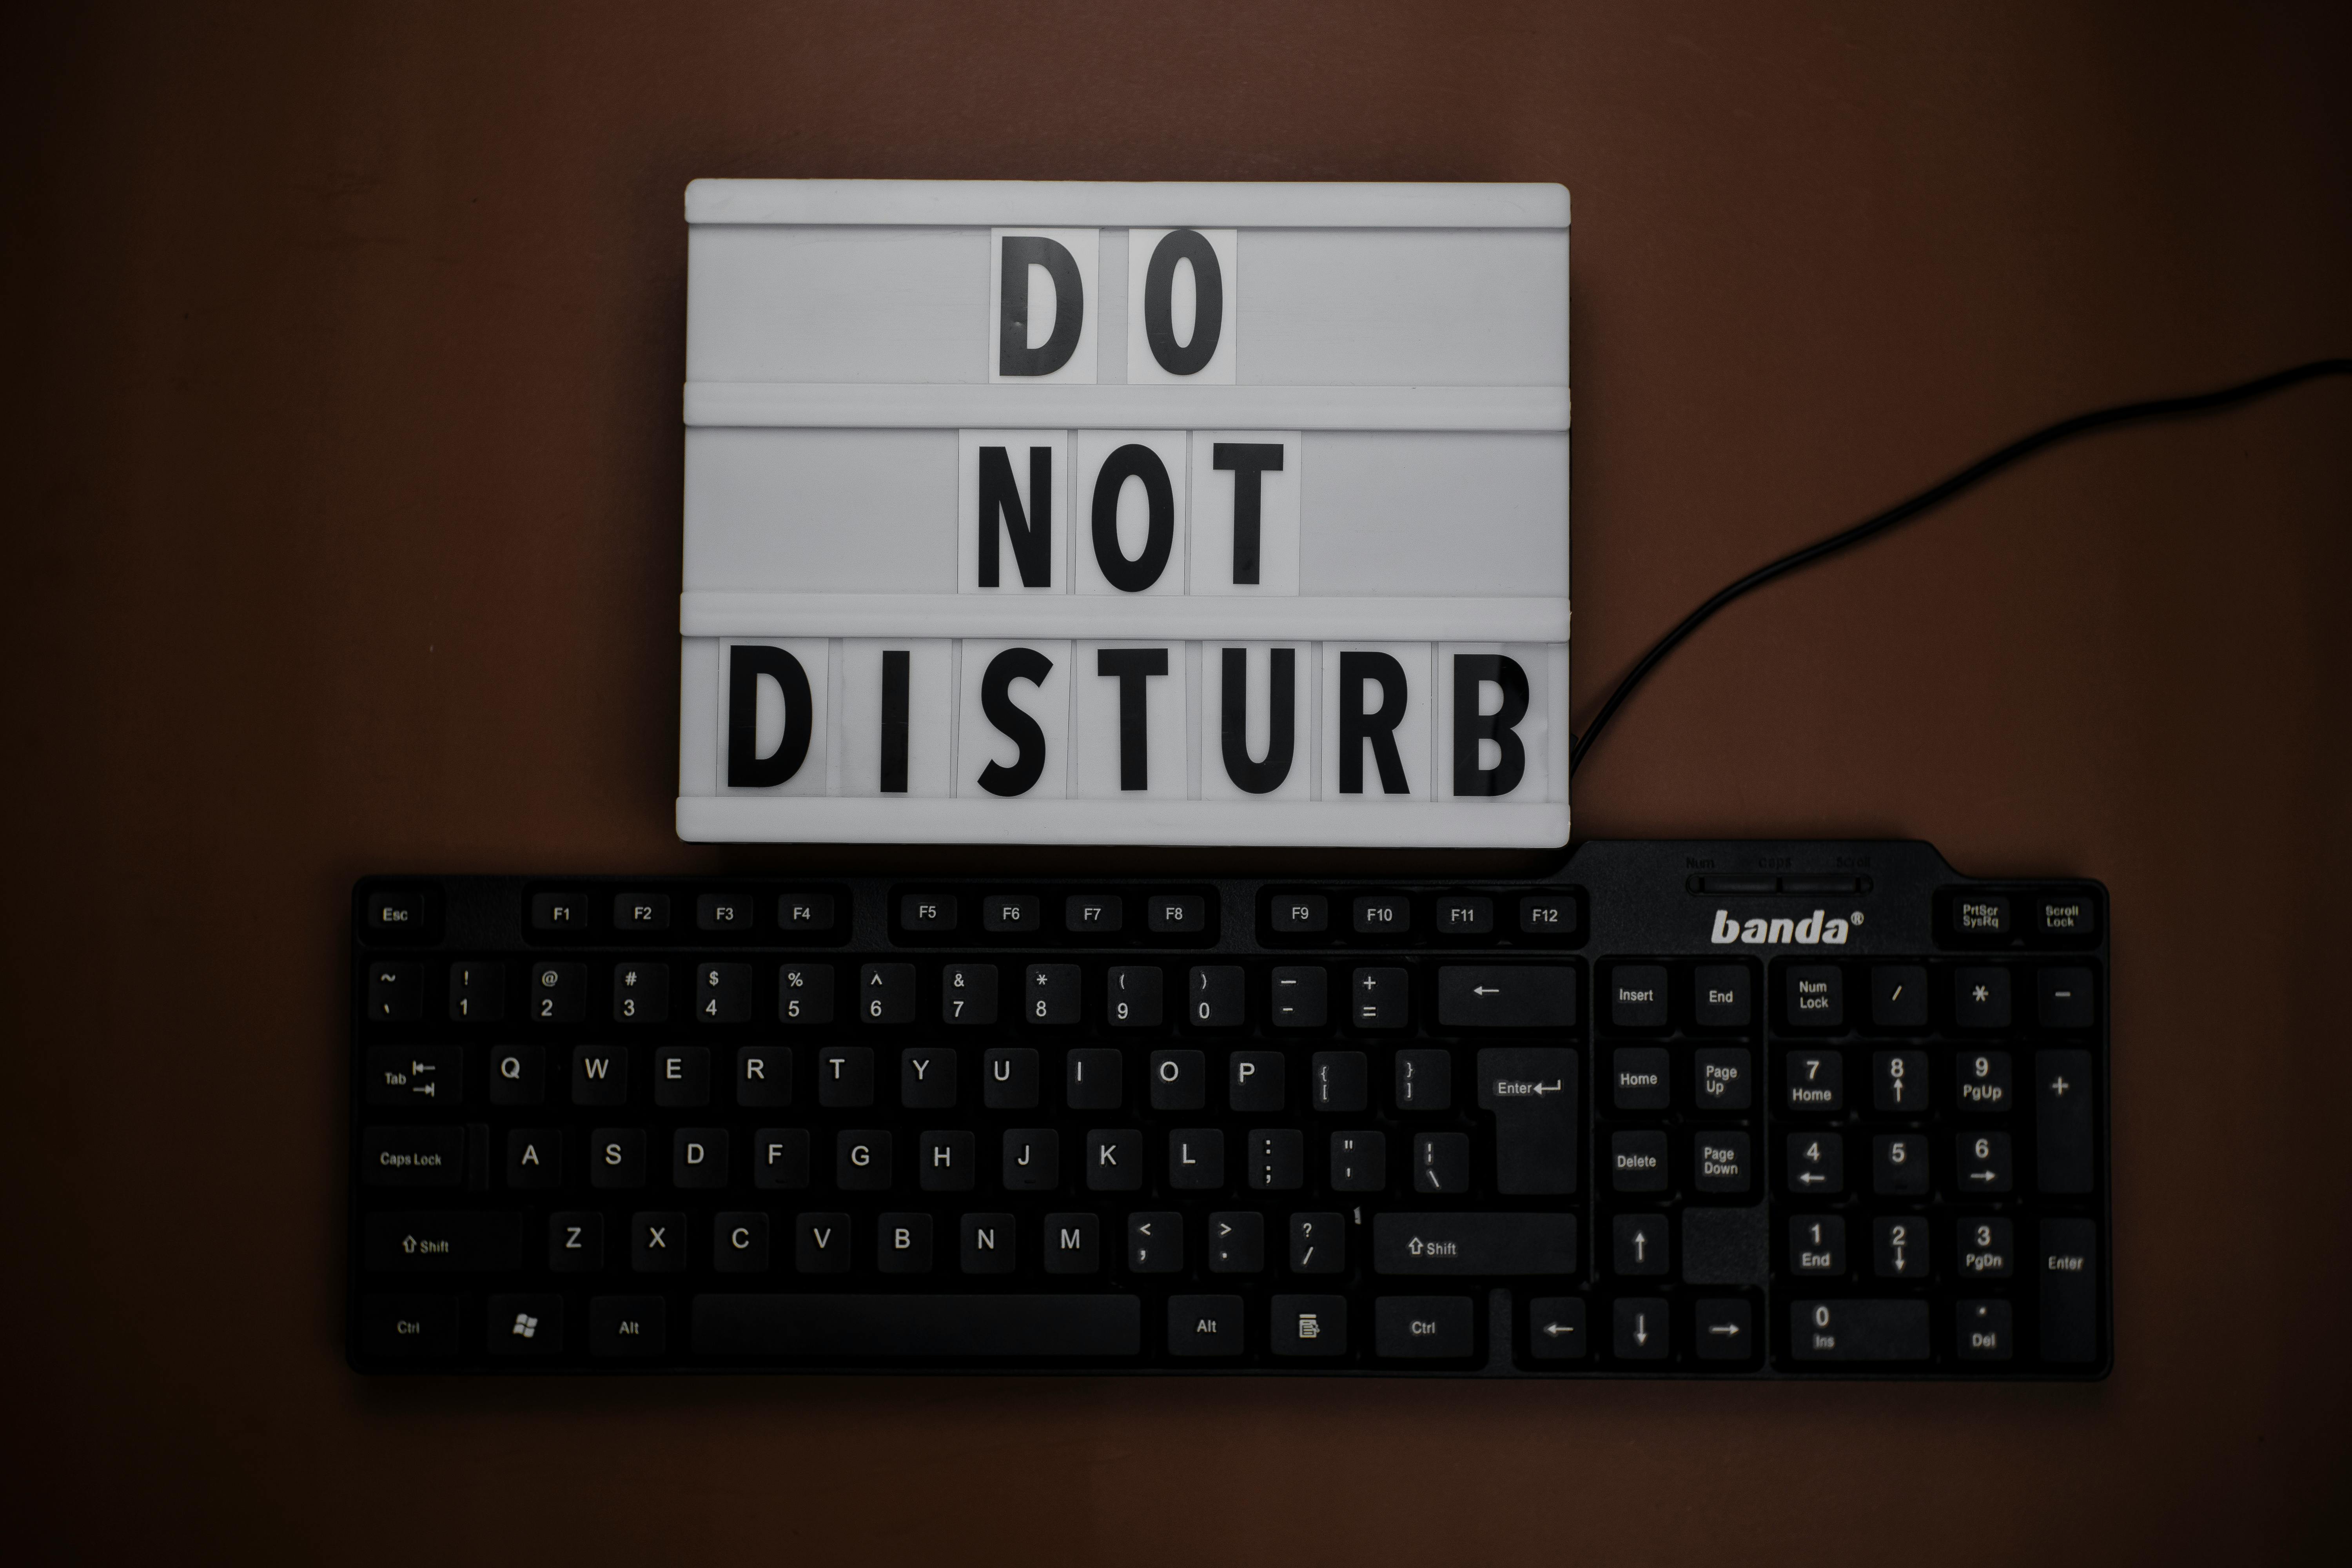 Retro Do Not Disturb Wall Paper Mural  Buy at EuroPosters